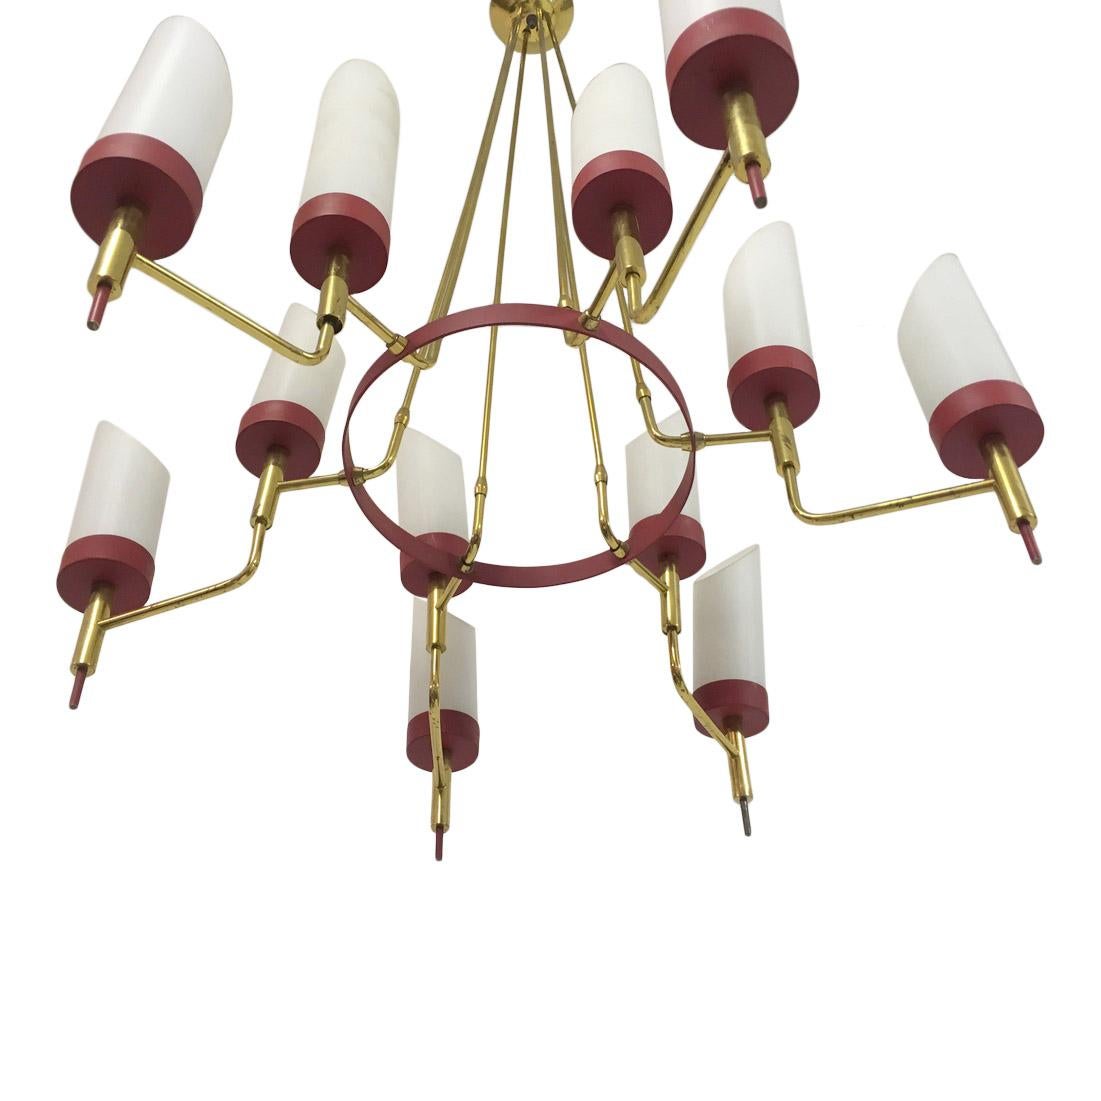 Brass framed chandelier
Painted red metal
With white glass diffusers
Italian 1950s.